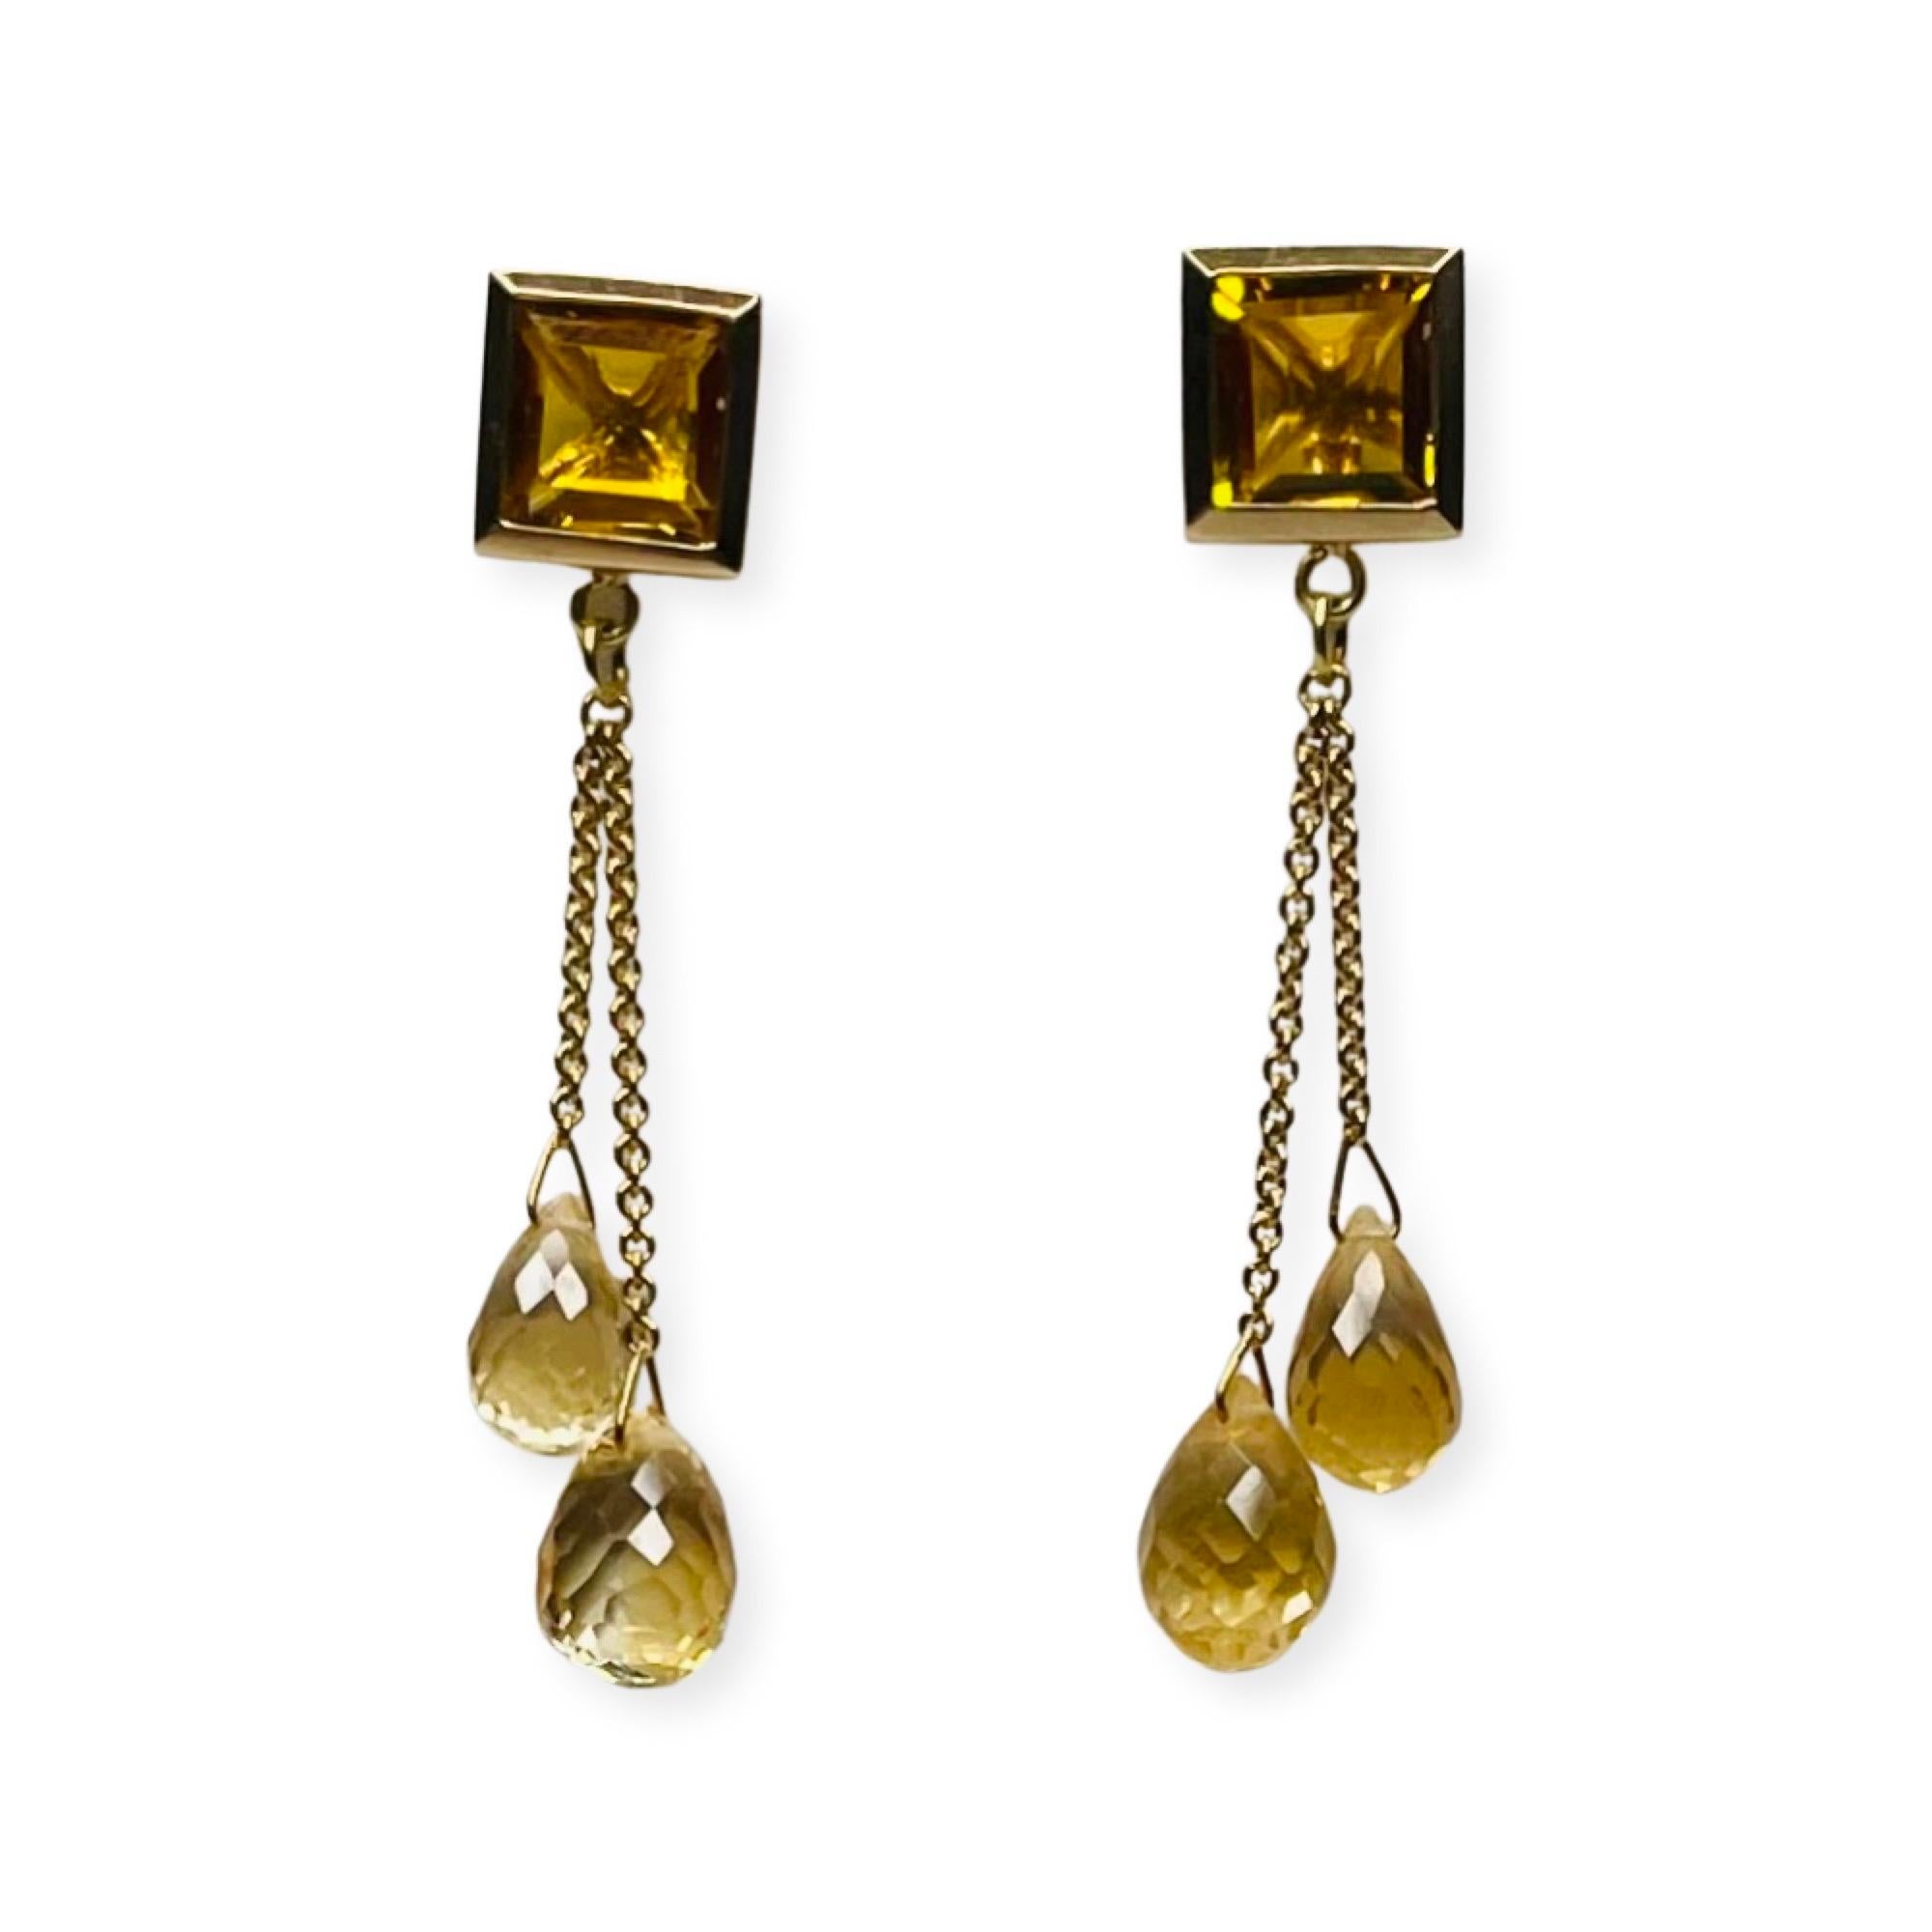 Lithos 14K  and 18K Yellow Gold Citrine Earrings. There are 2 - 8.5 mm square citrines, bezel set in 14K yellow gold. They have posts and 14KY gold backs imbedded in silicon. From these citrines dangle 2 citrine briolettes off of a ring.  They are